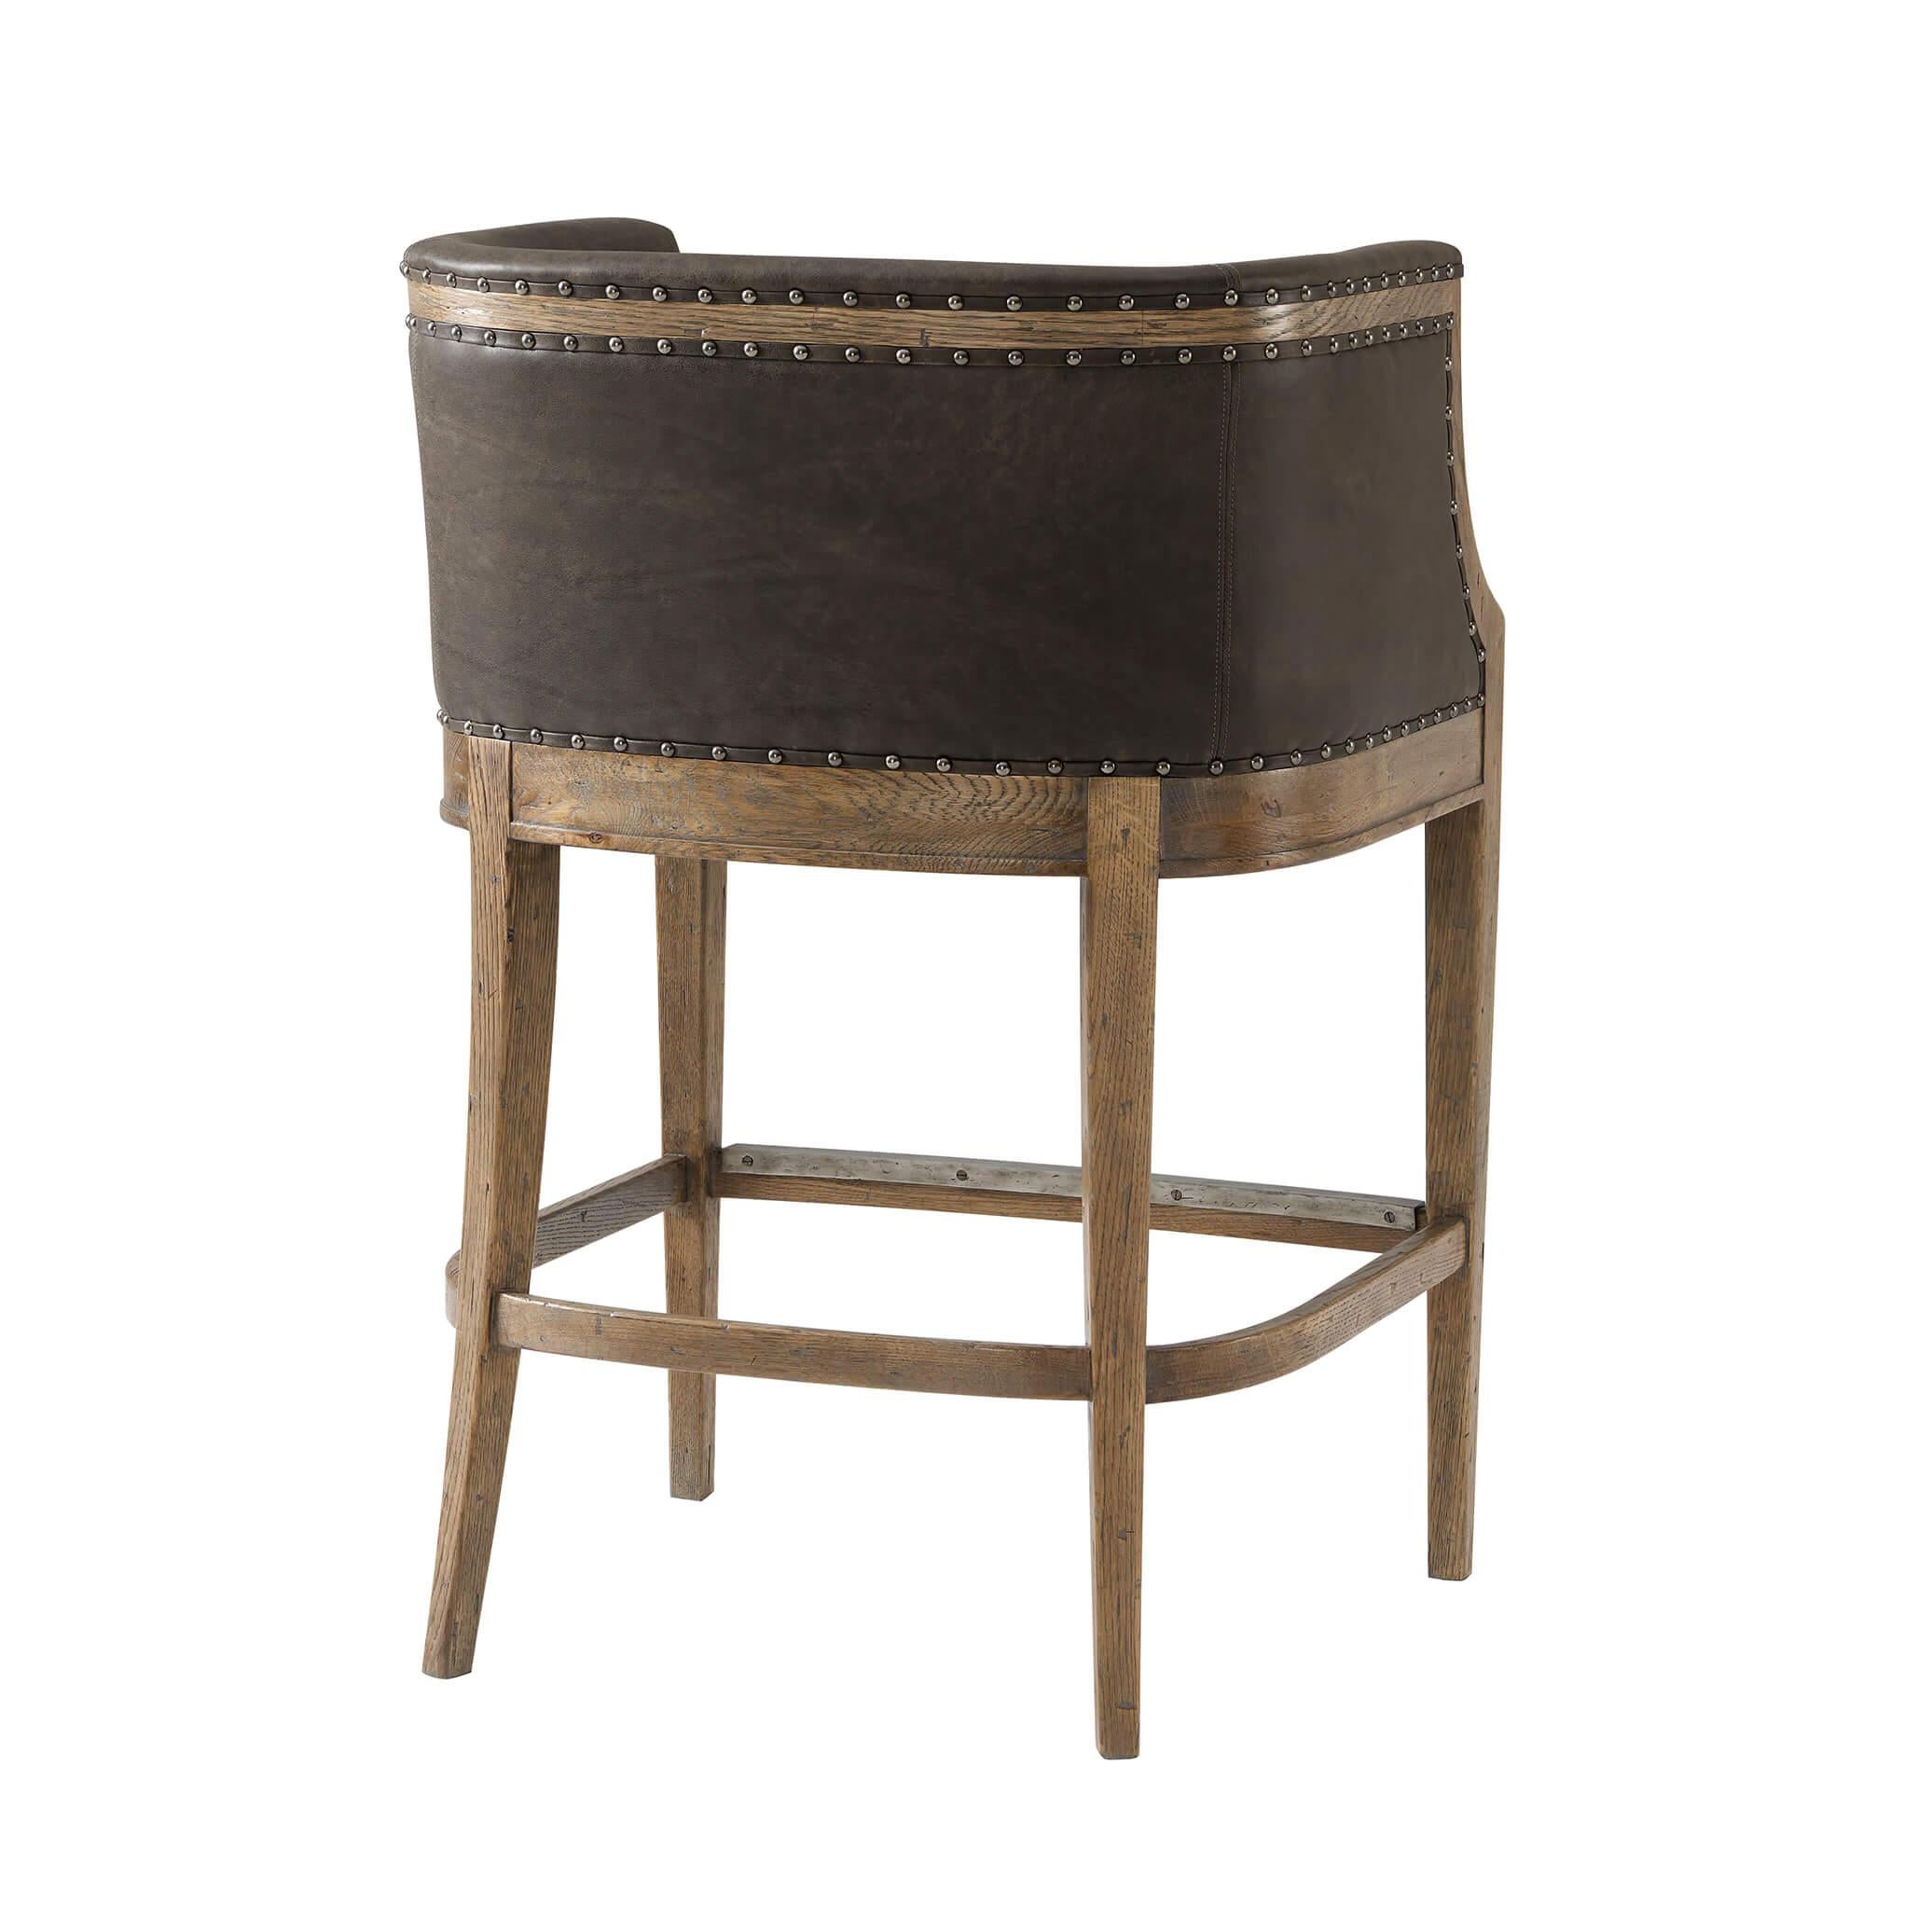 An English country bar chair in oak and leather barrel back bar chair with nailhead trim details, square tapered legs, and a stretcher base.

Dimensions: 27